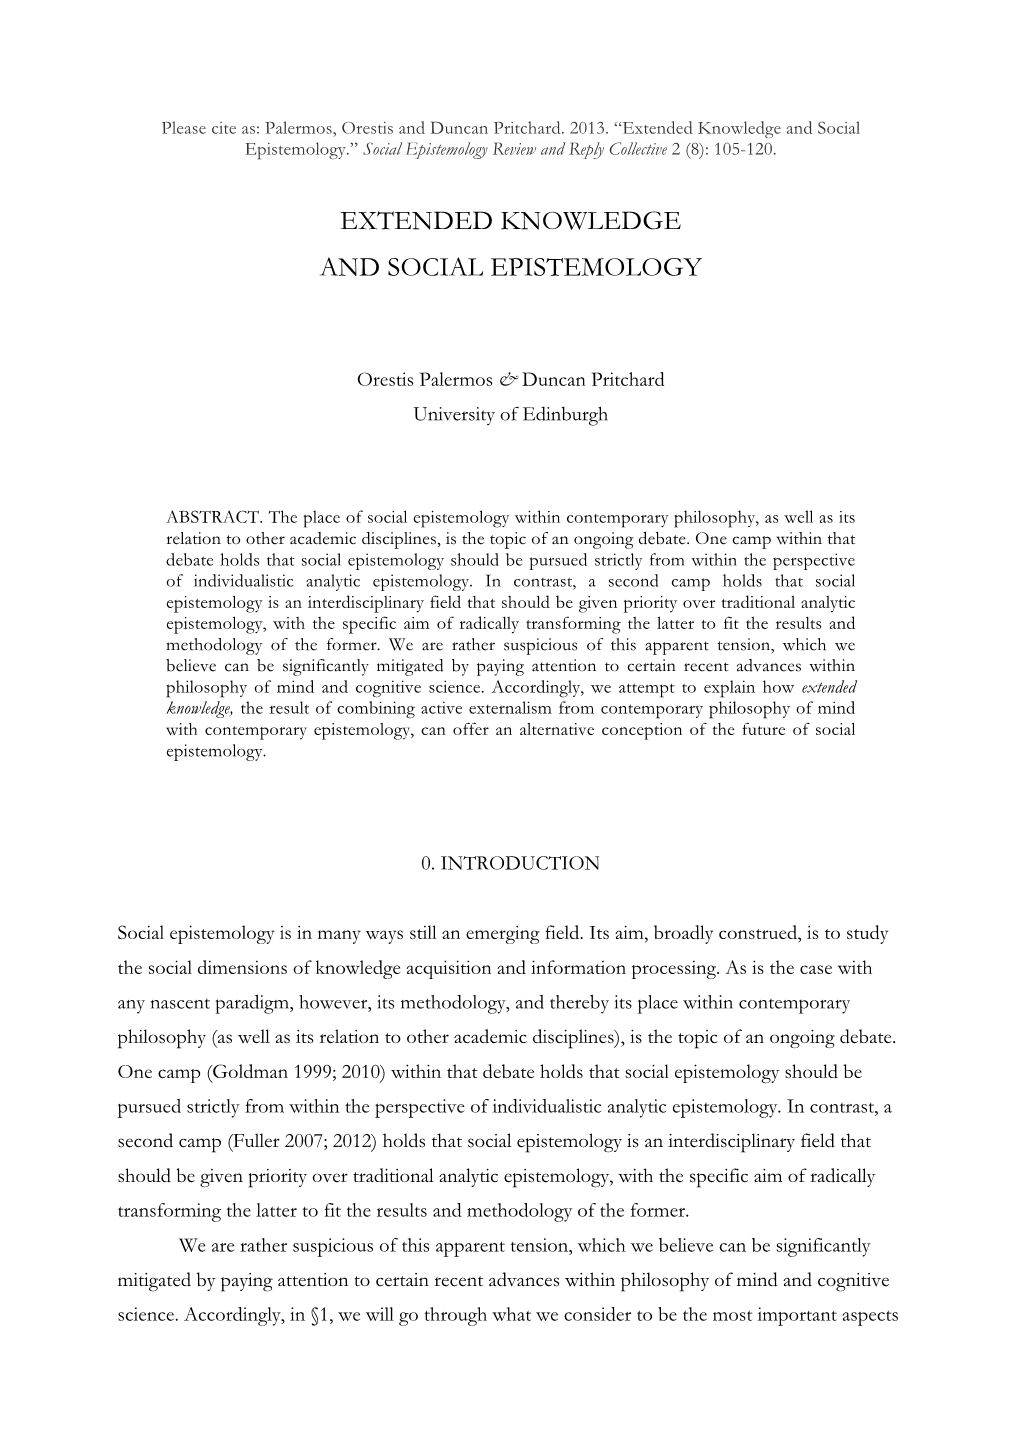 Extended Knowledge and Social Epistemology.” Social Epistemology Review and Reply Collective 2 (8): 105-120